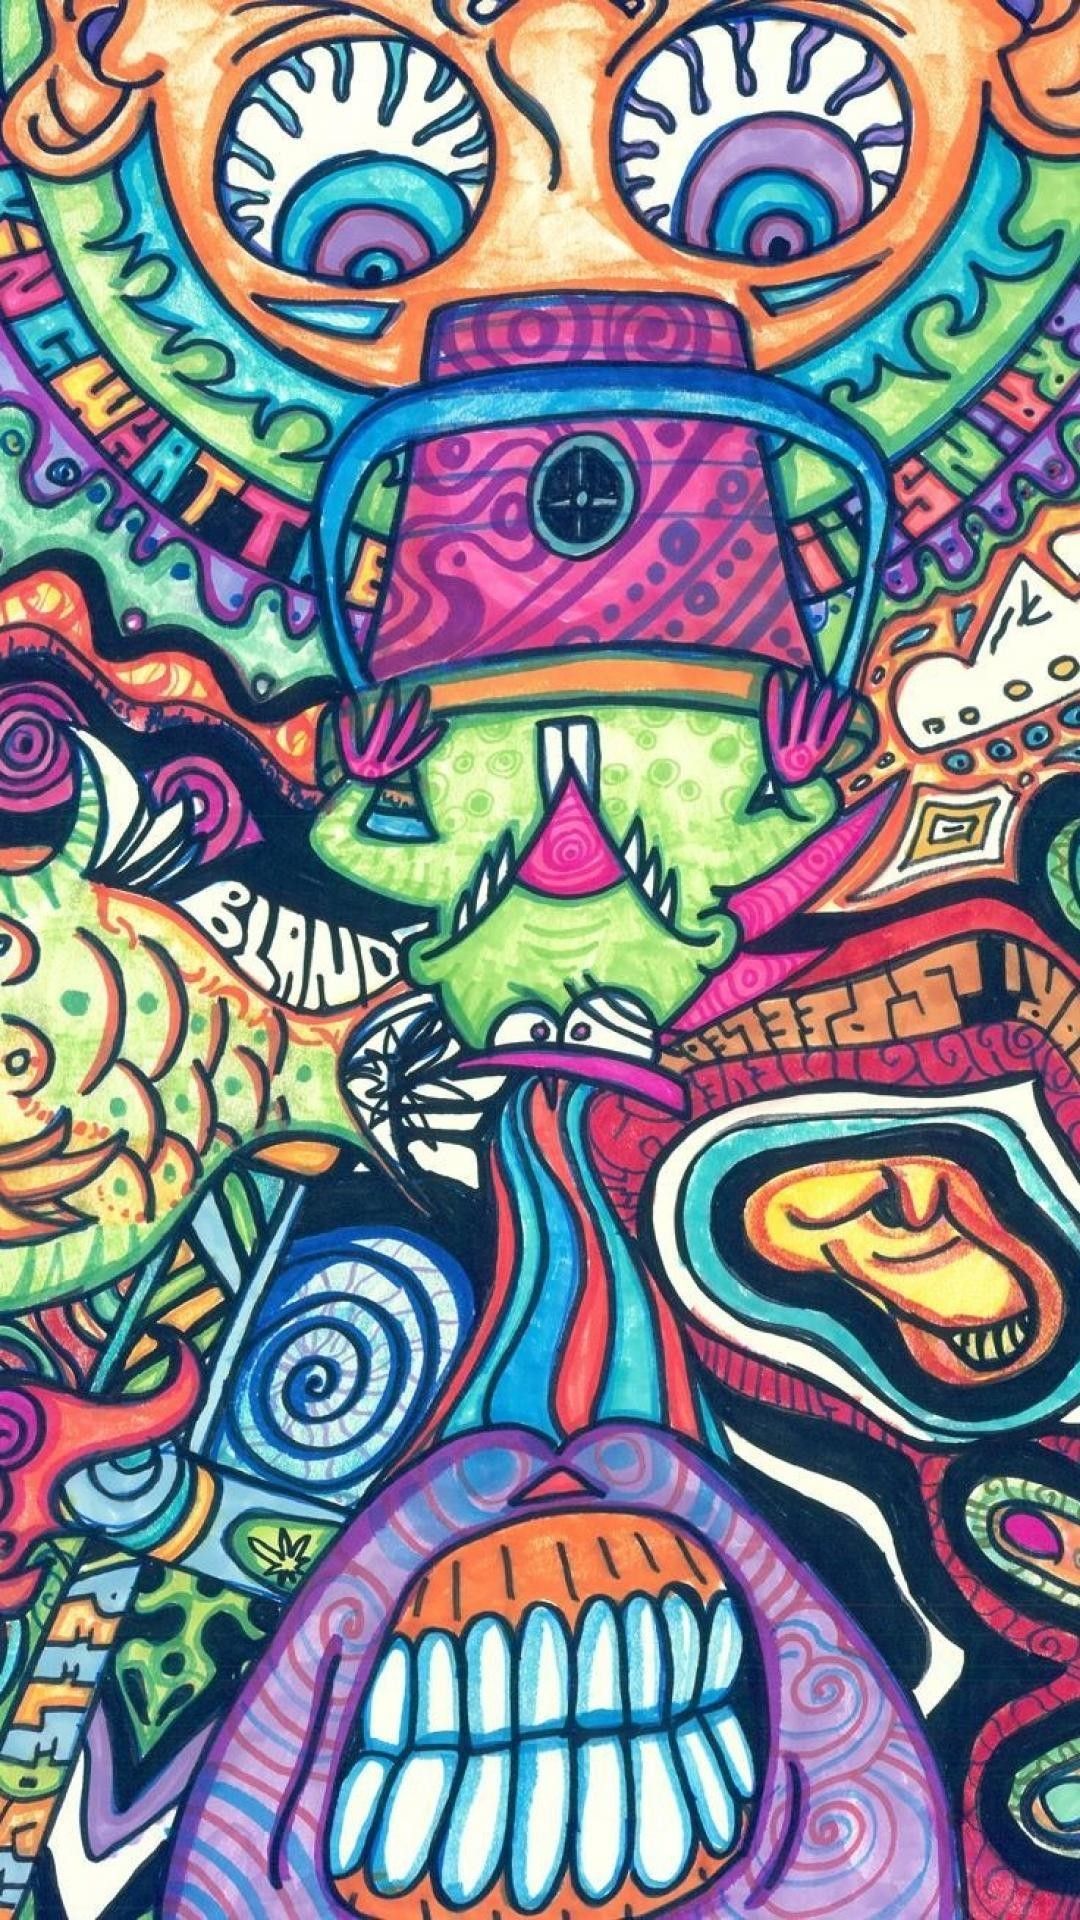 Trippy iPhone Wallpapers on WallpaperDog